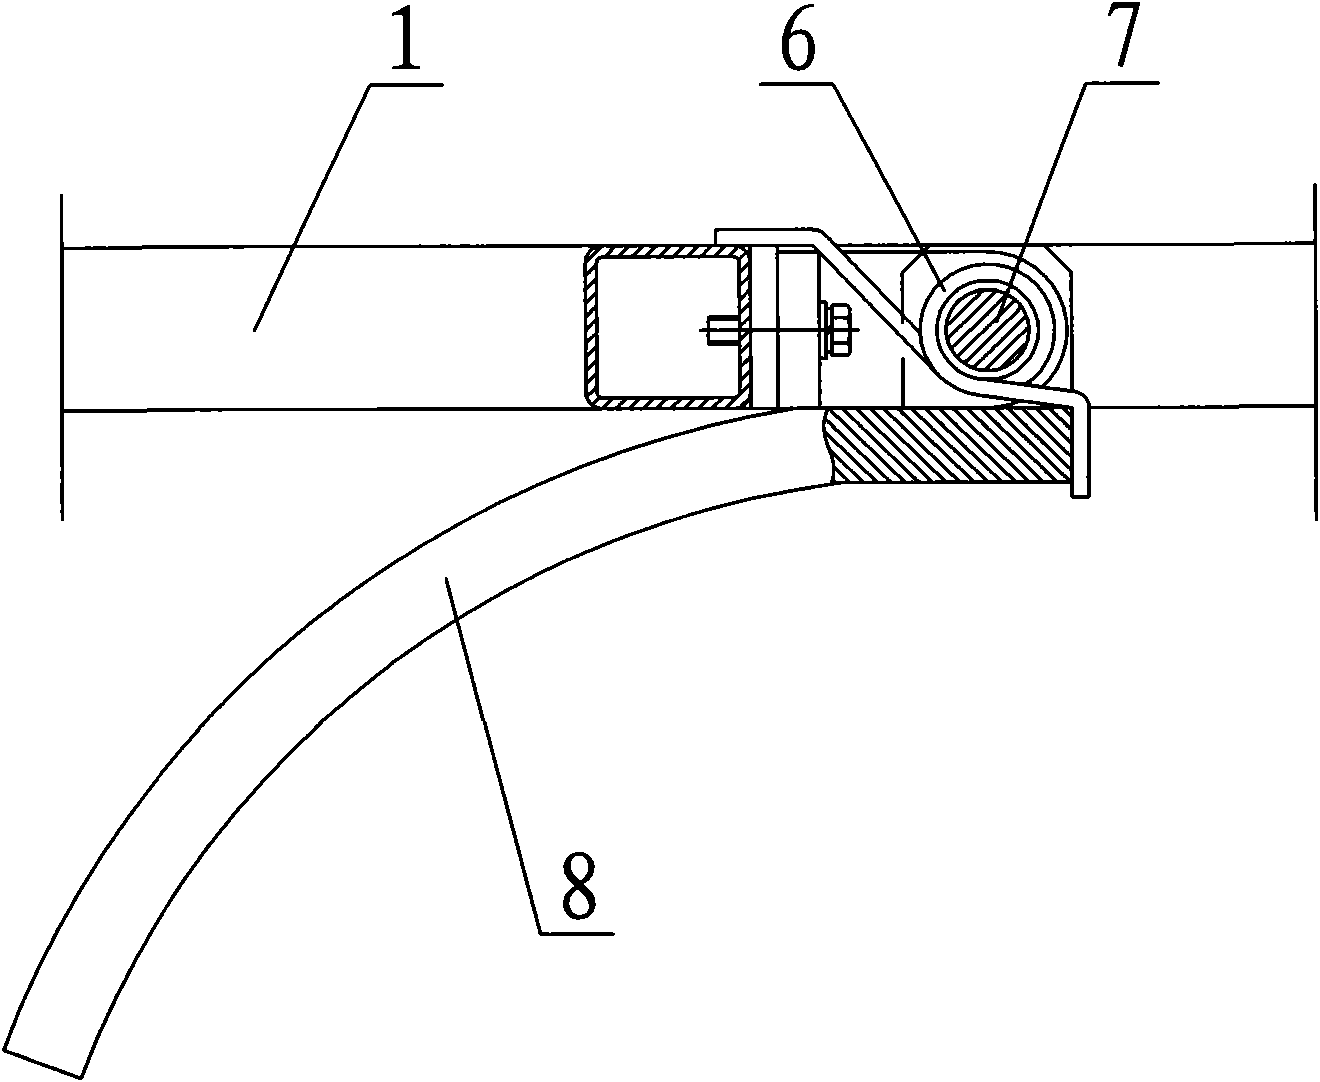 Damped type tyre lowering device